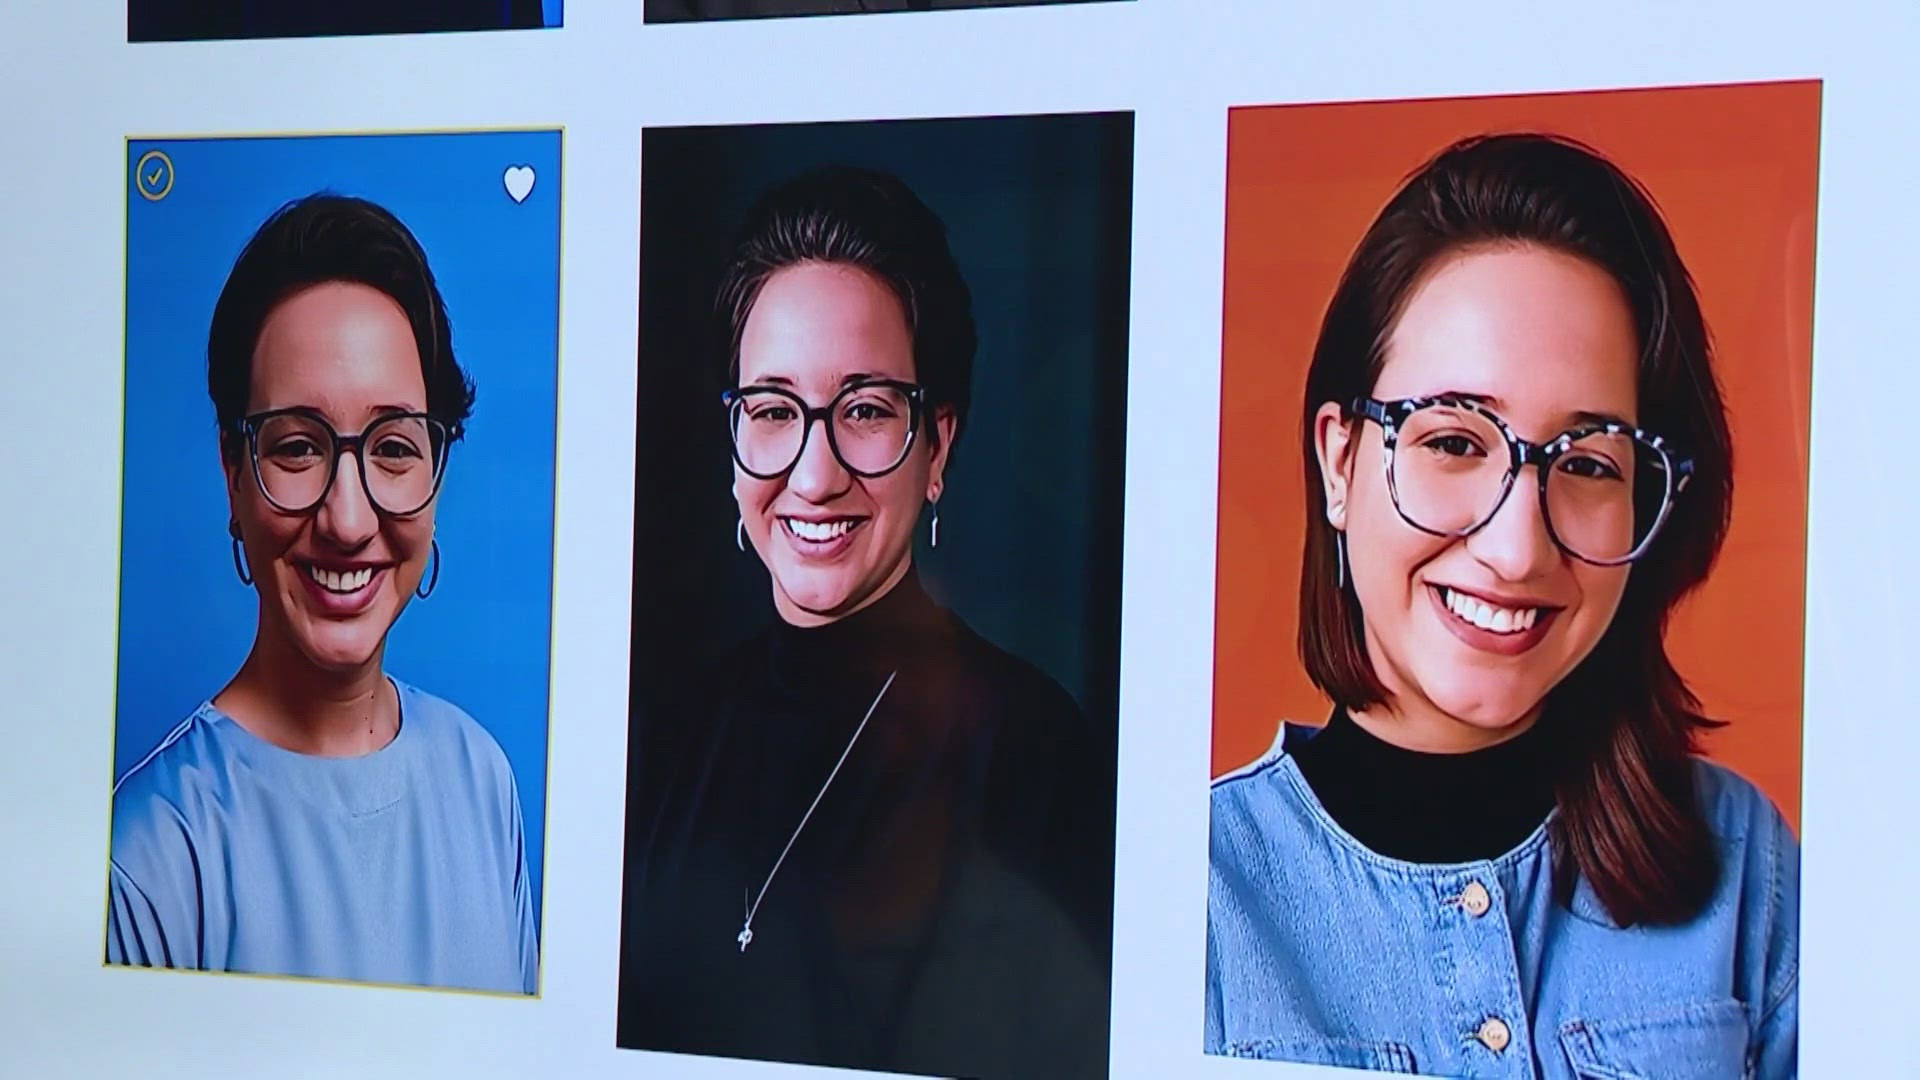 Experts say AI headshots are having their moment, so we put them to the test.